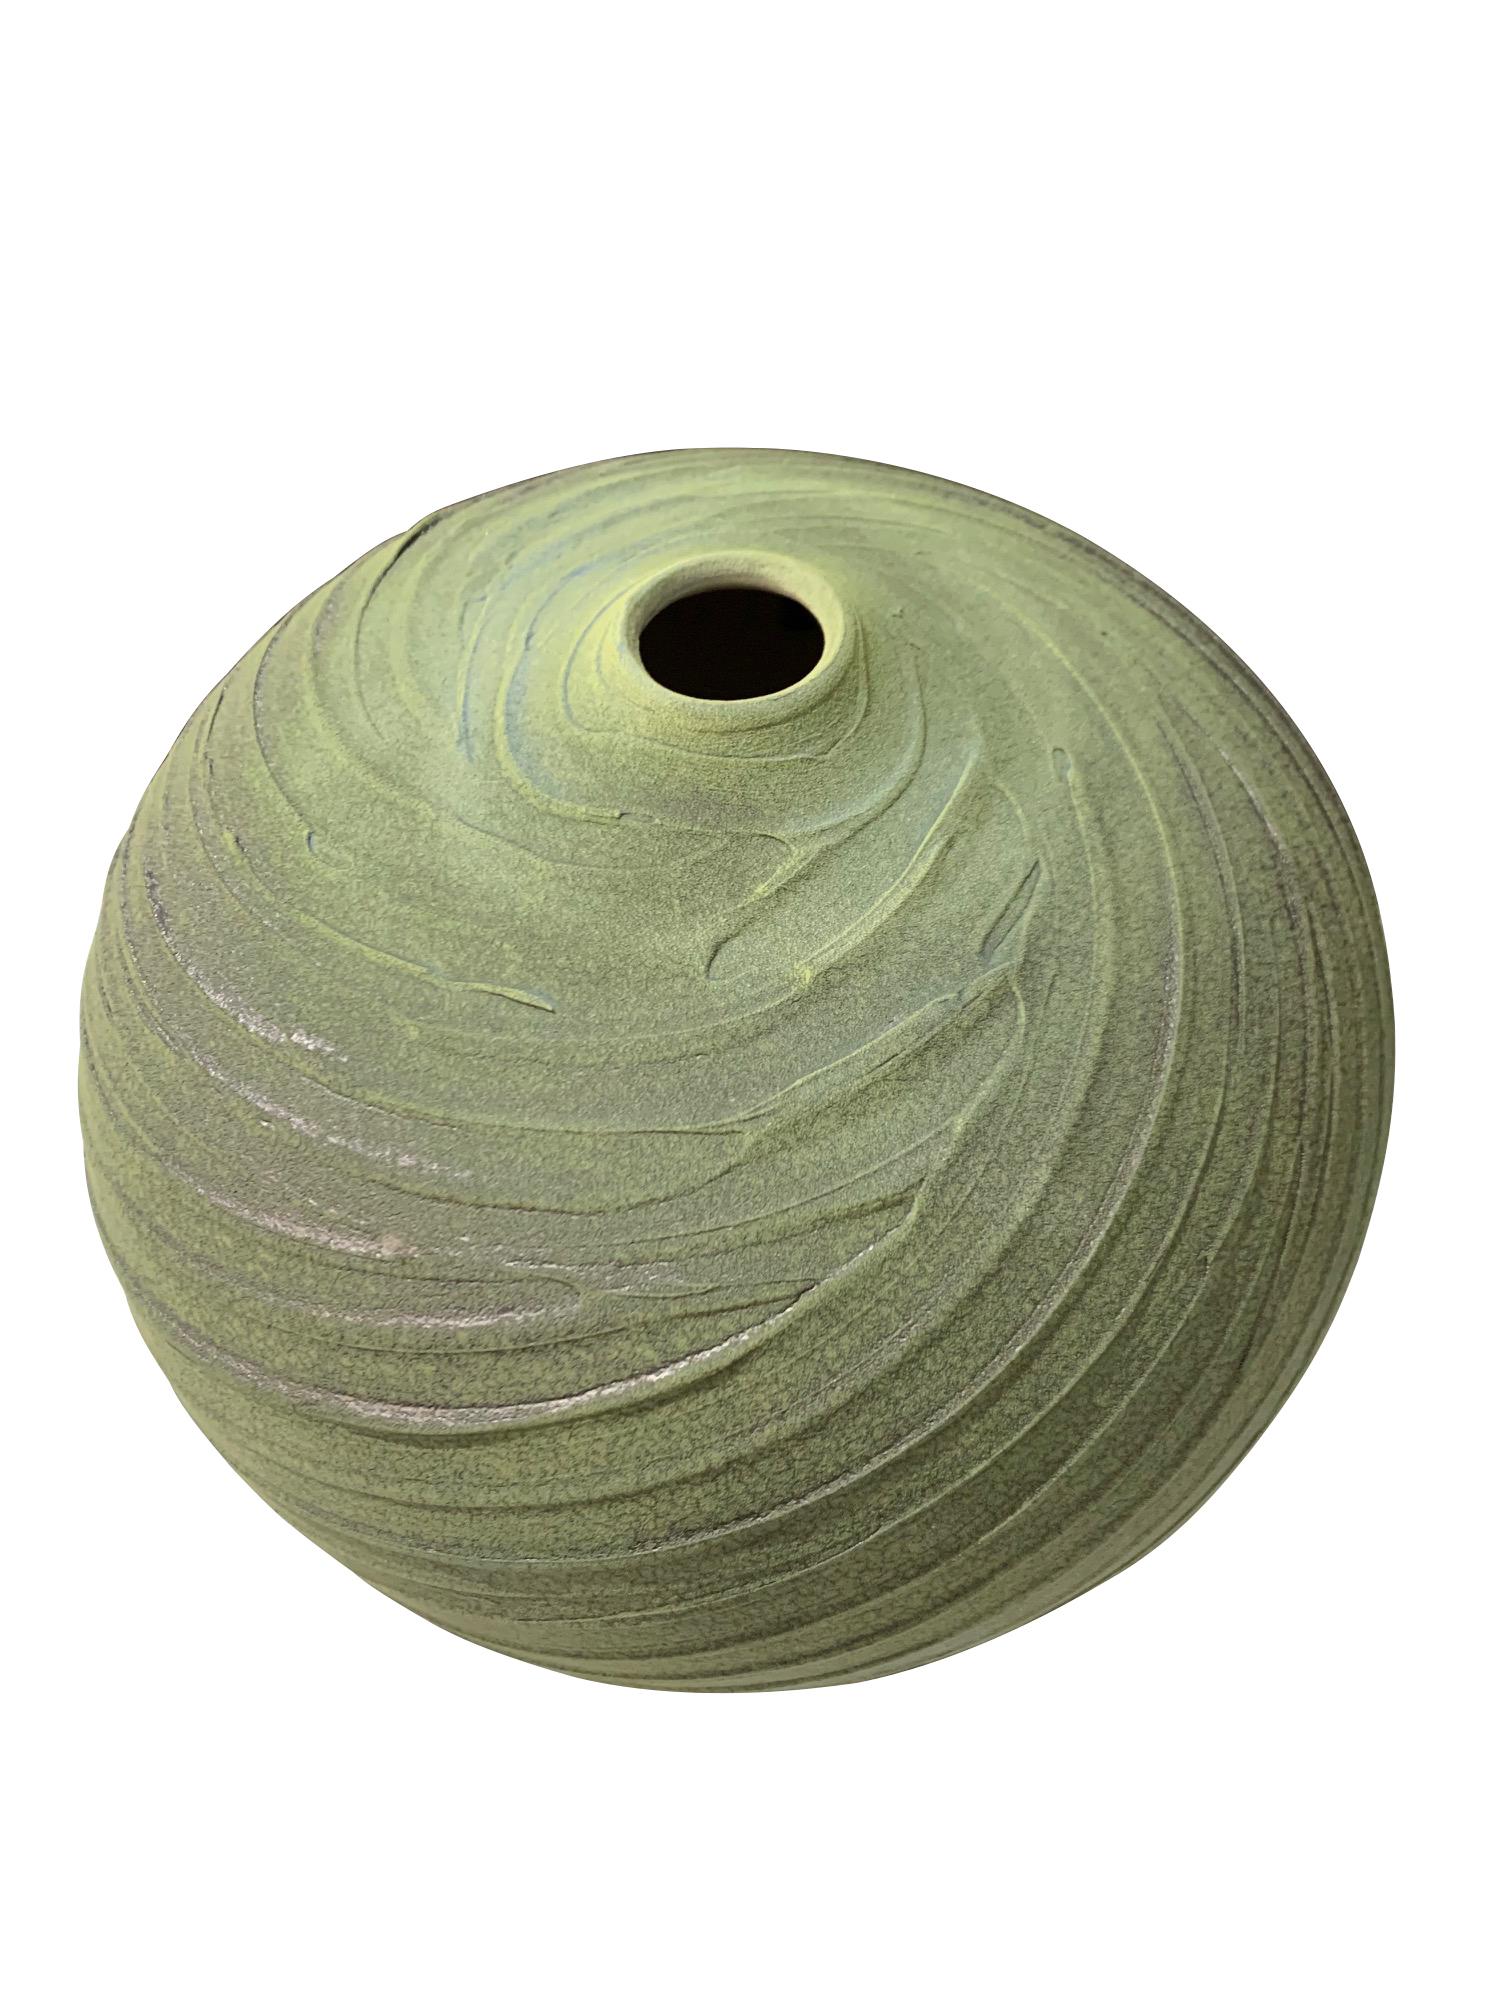 American Green Textured Hand Made Earthenware Vase, Contemporary, USA For Sale